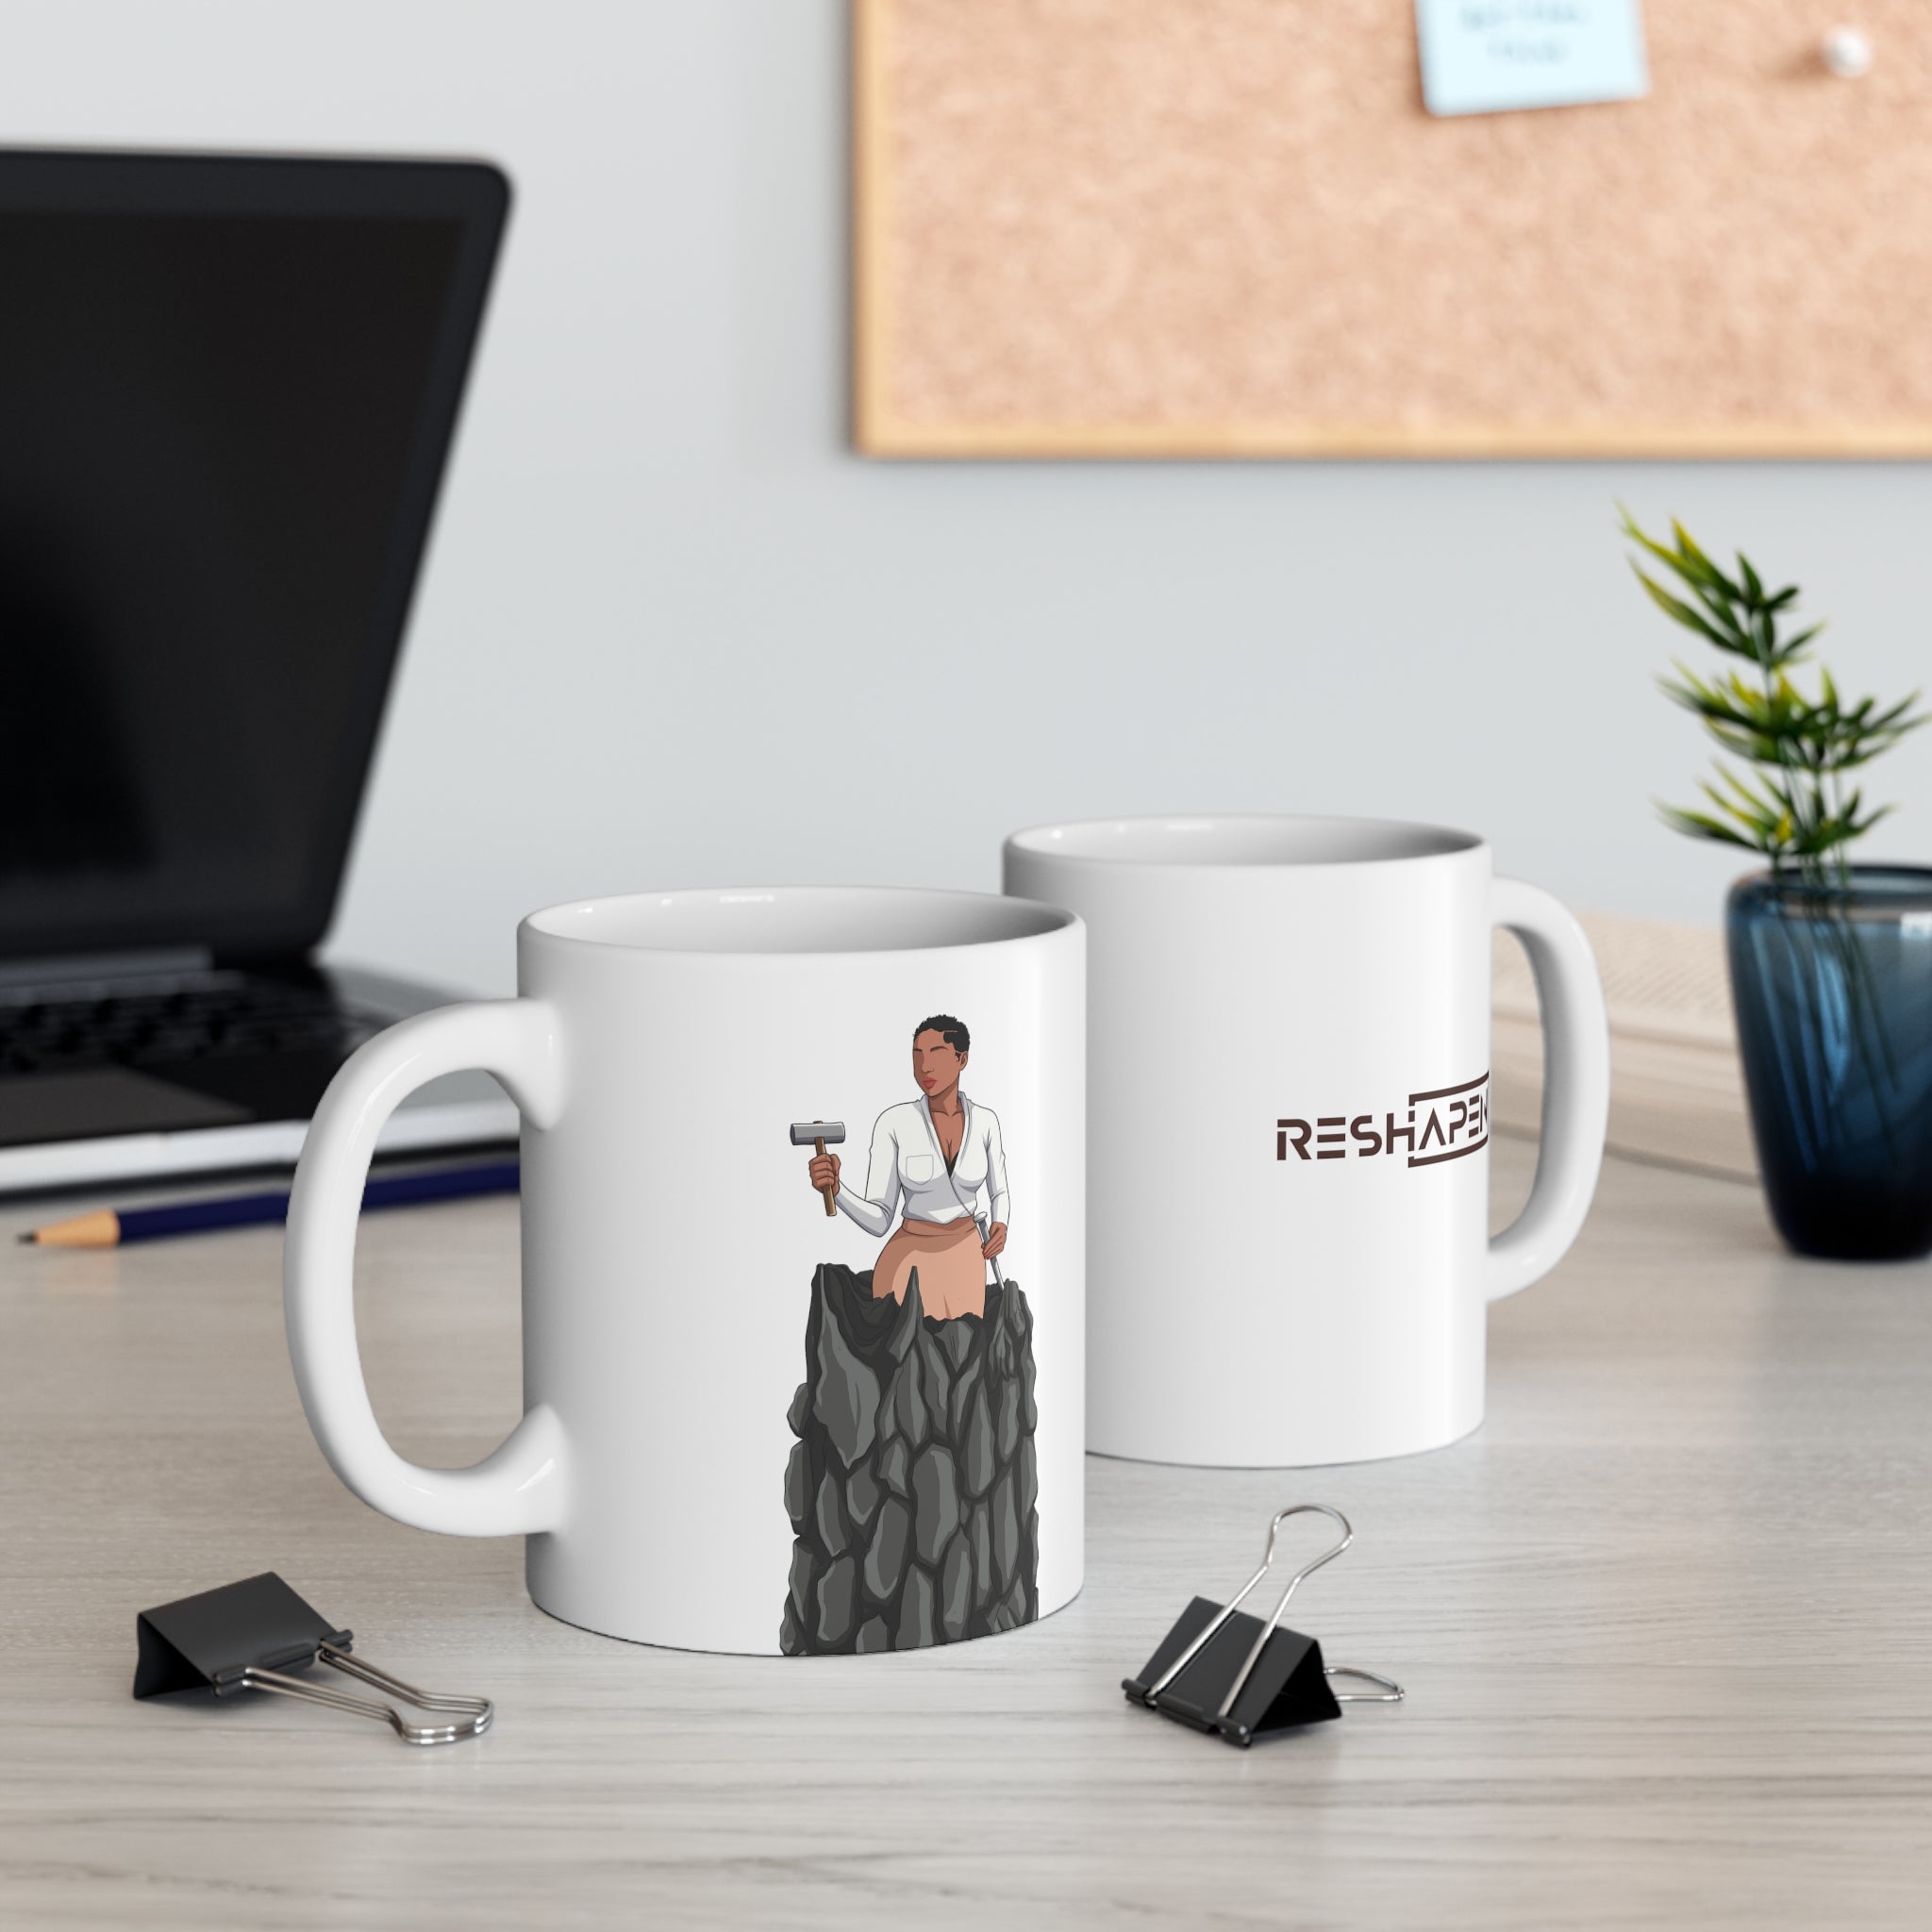 A person working hard to better his/herself - Ceramic Mug 11oz - Self-Made Woman #1 - Breakthrough Collection